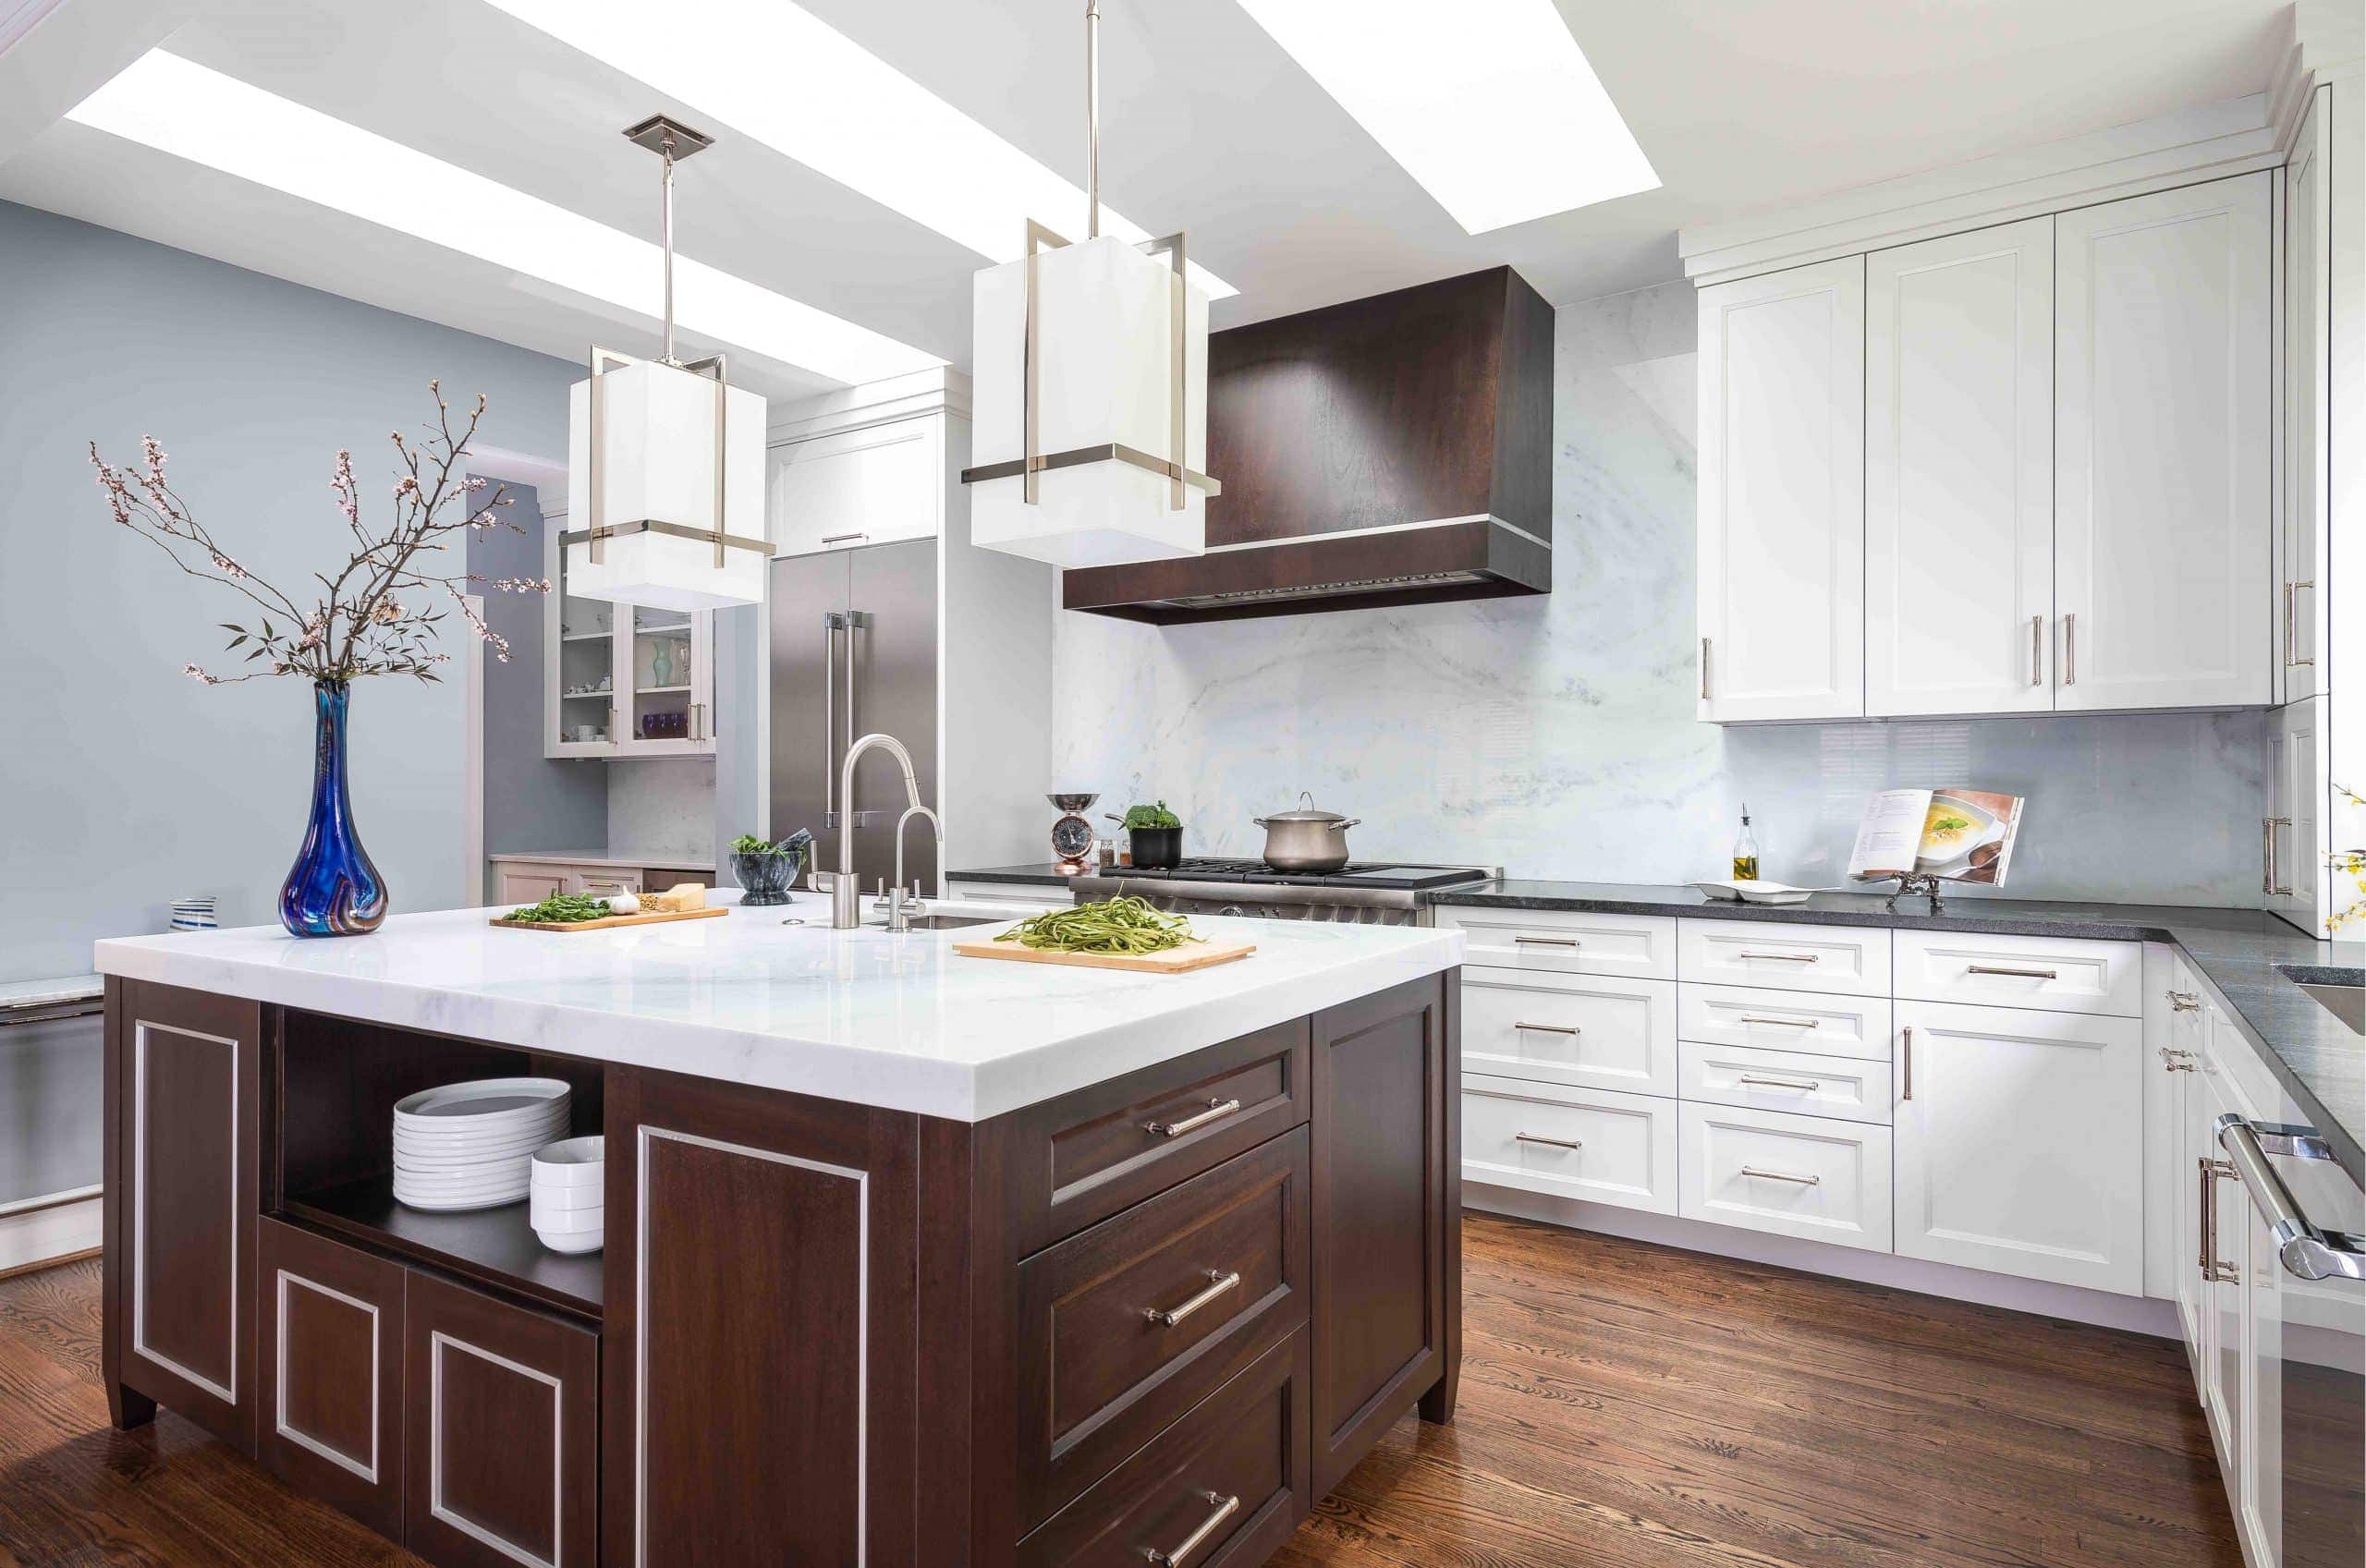 Work with the experts at Jennifer Gilmer Kitchen & Bath, Kitchen Remodeling in Bethany Beach, Delaware